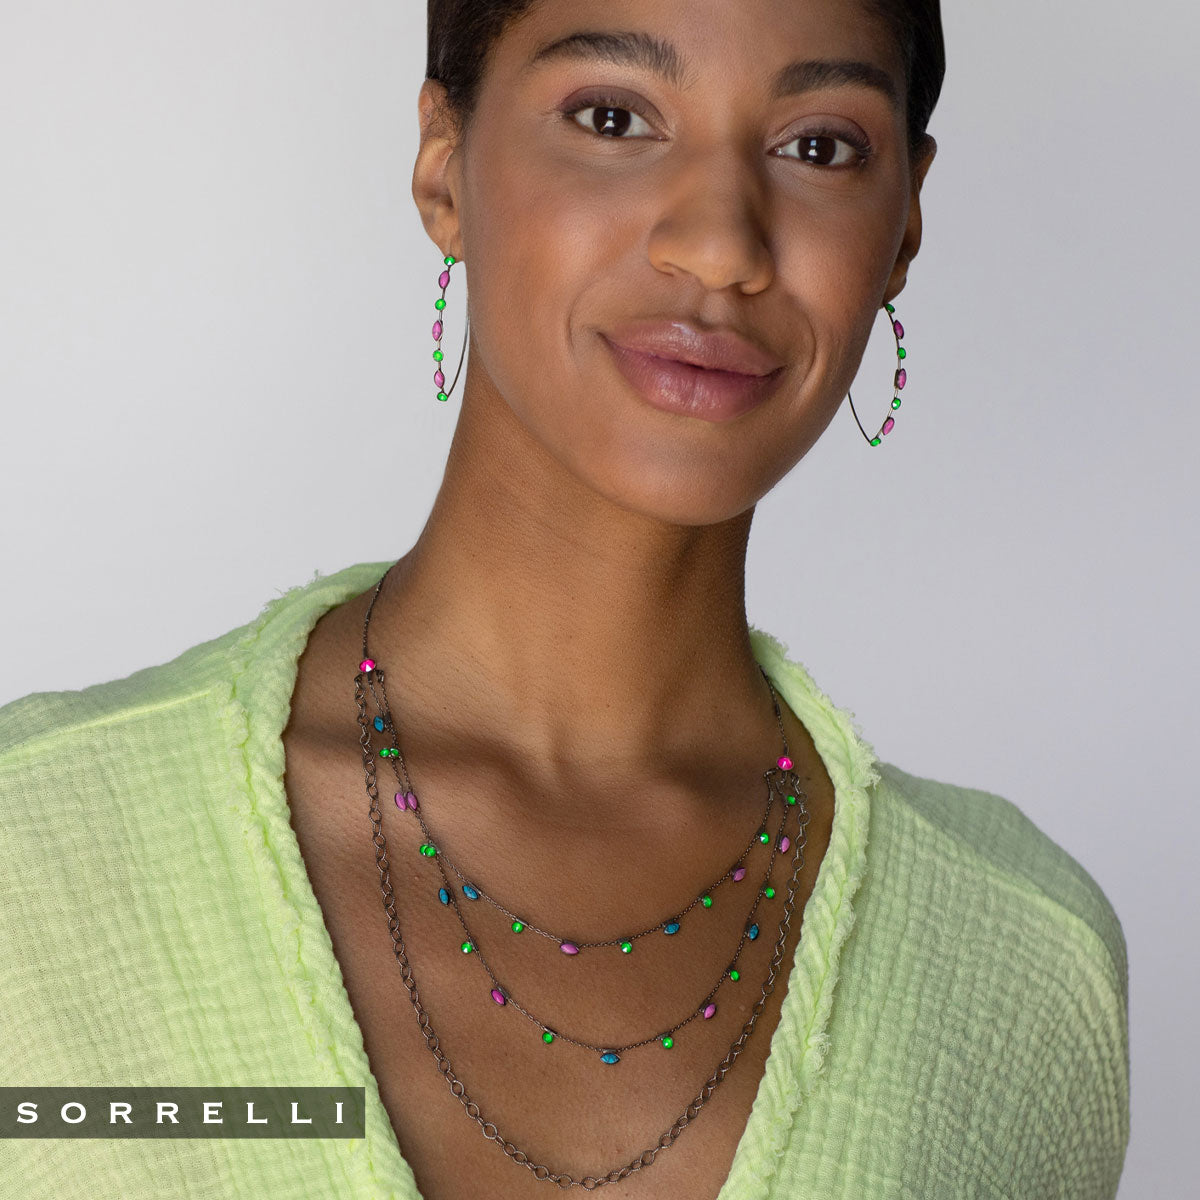 Somer Layered Necklace - NEV7ASWDW